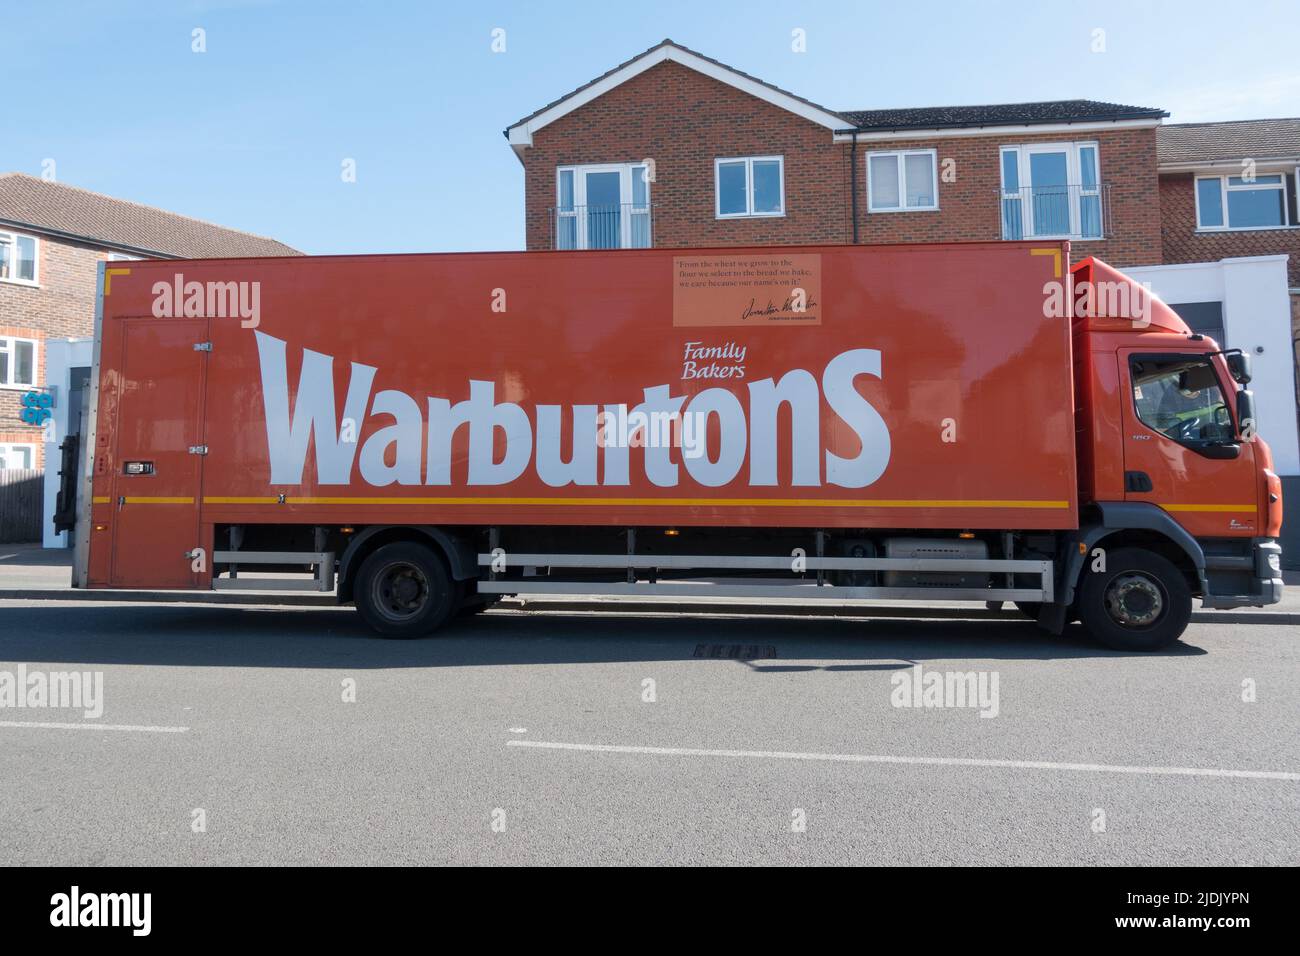 Warburtons family bakers a long running family owing the bread baking business in England Stock Photo